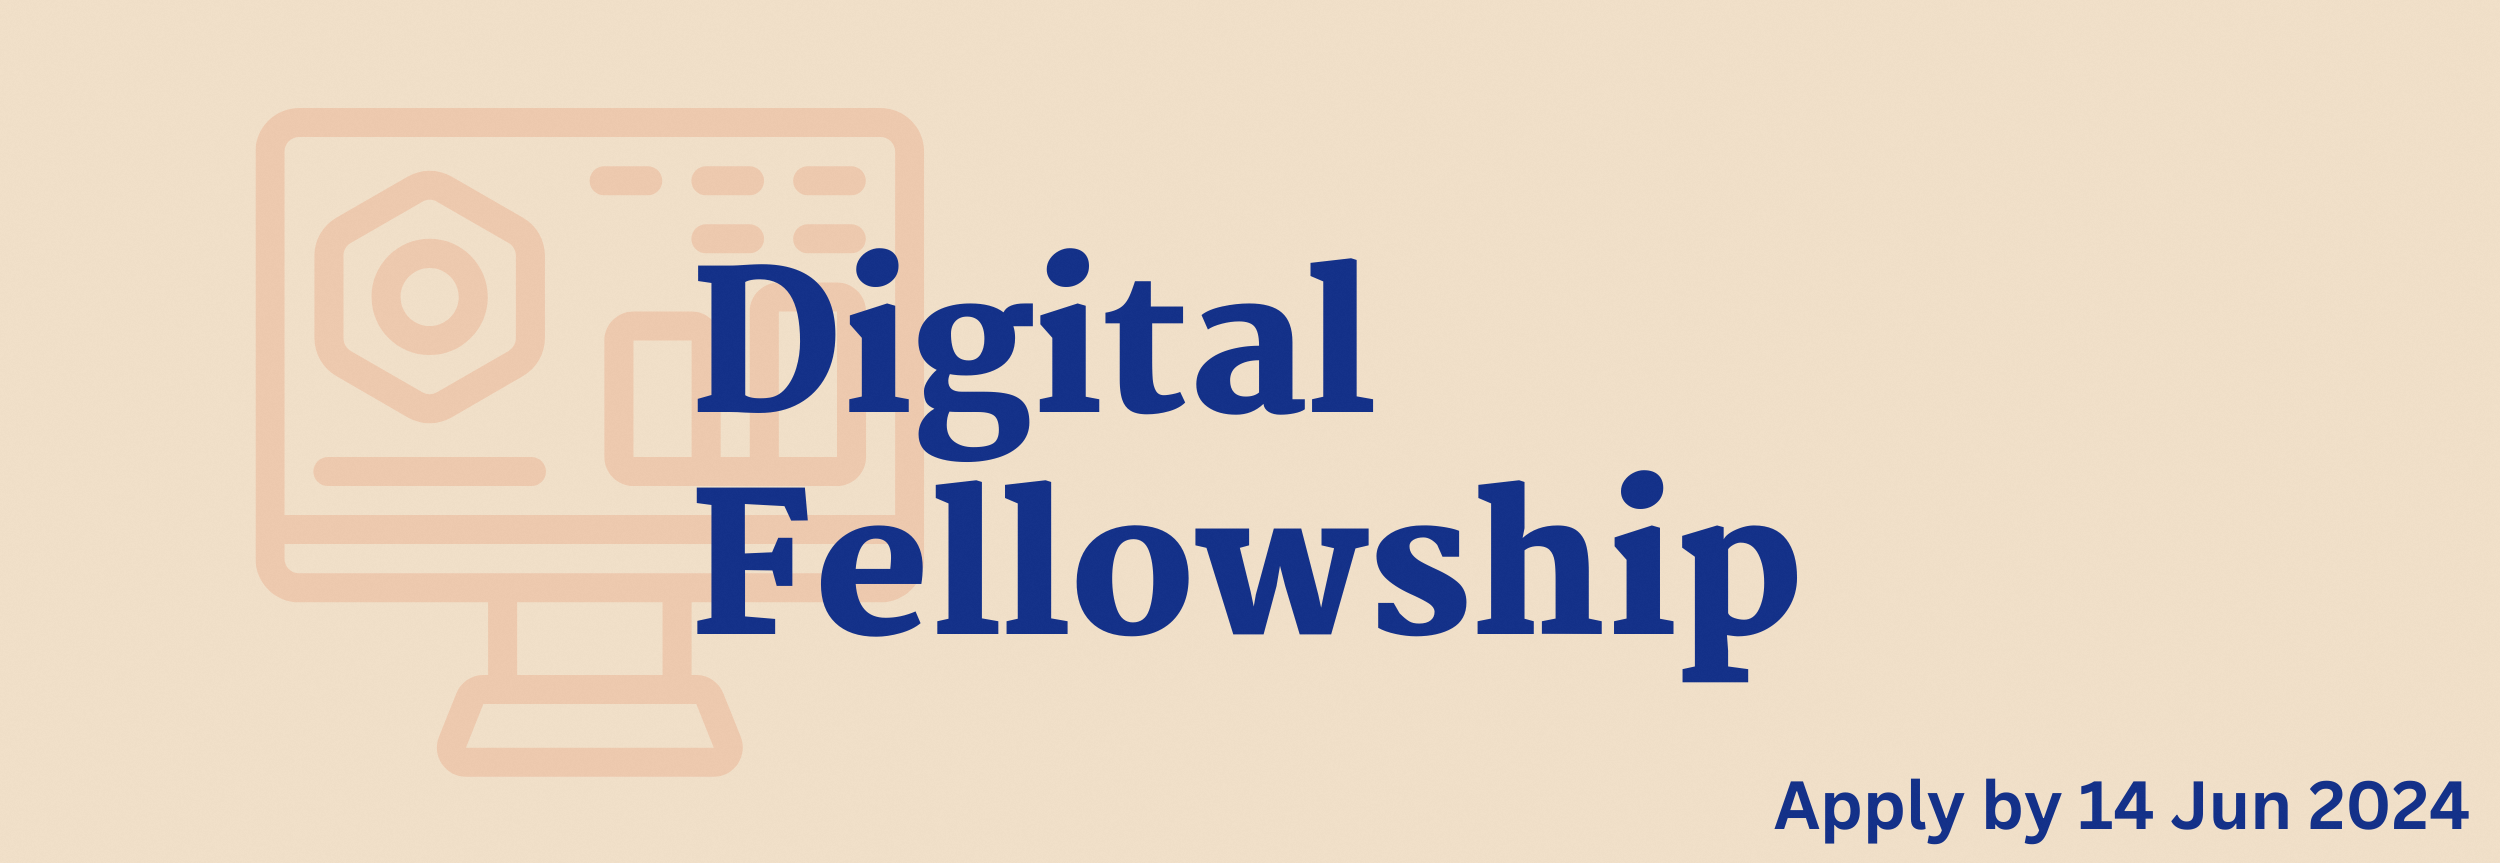 Apply for the National Library’s Digital Fellowship by 14 June 2024.